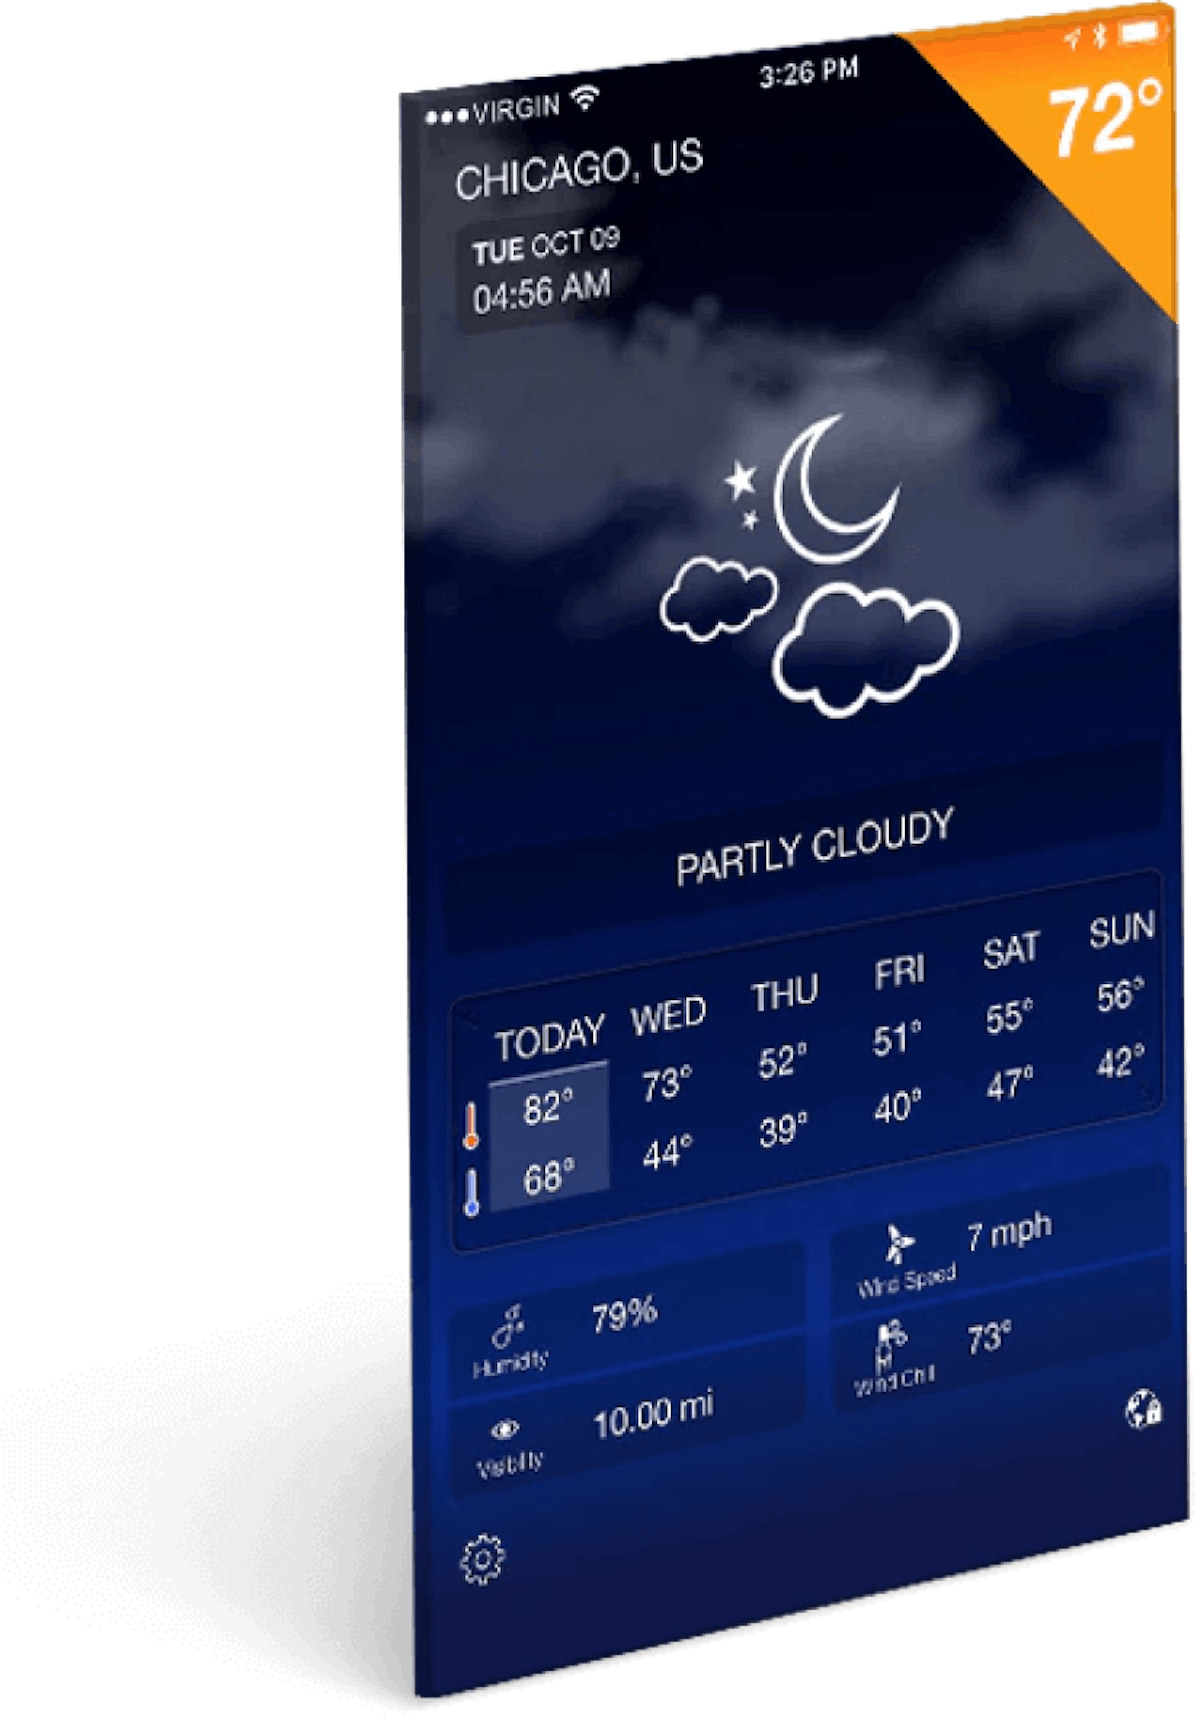 Displays weather conditions for multiple locations